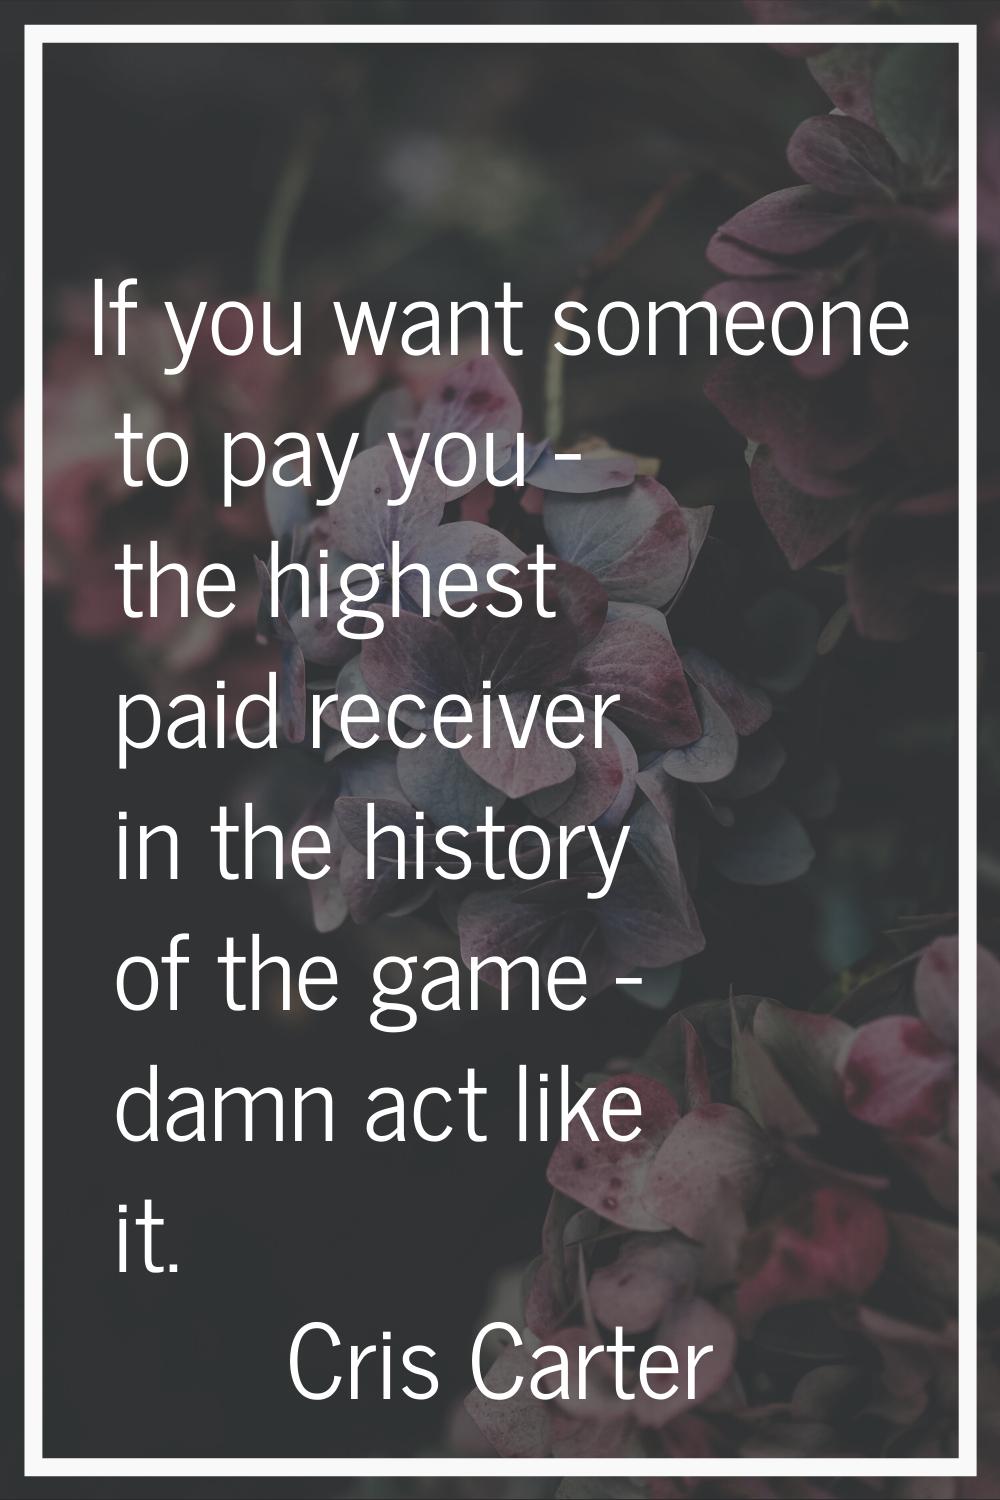 If you want someone to pay you - the highest paid receiver in the history of the game - damn act li